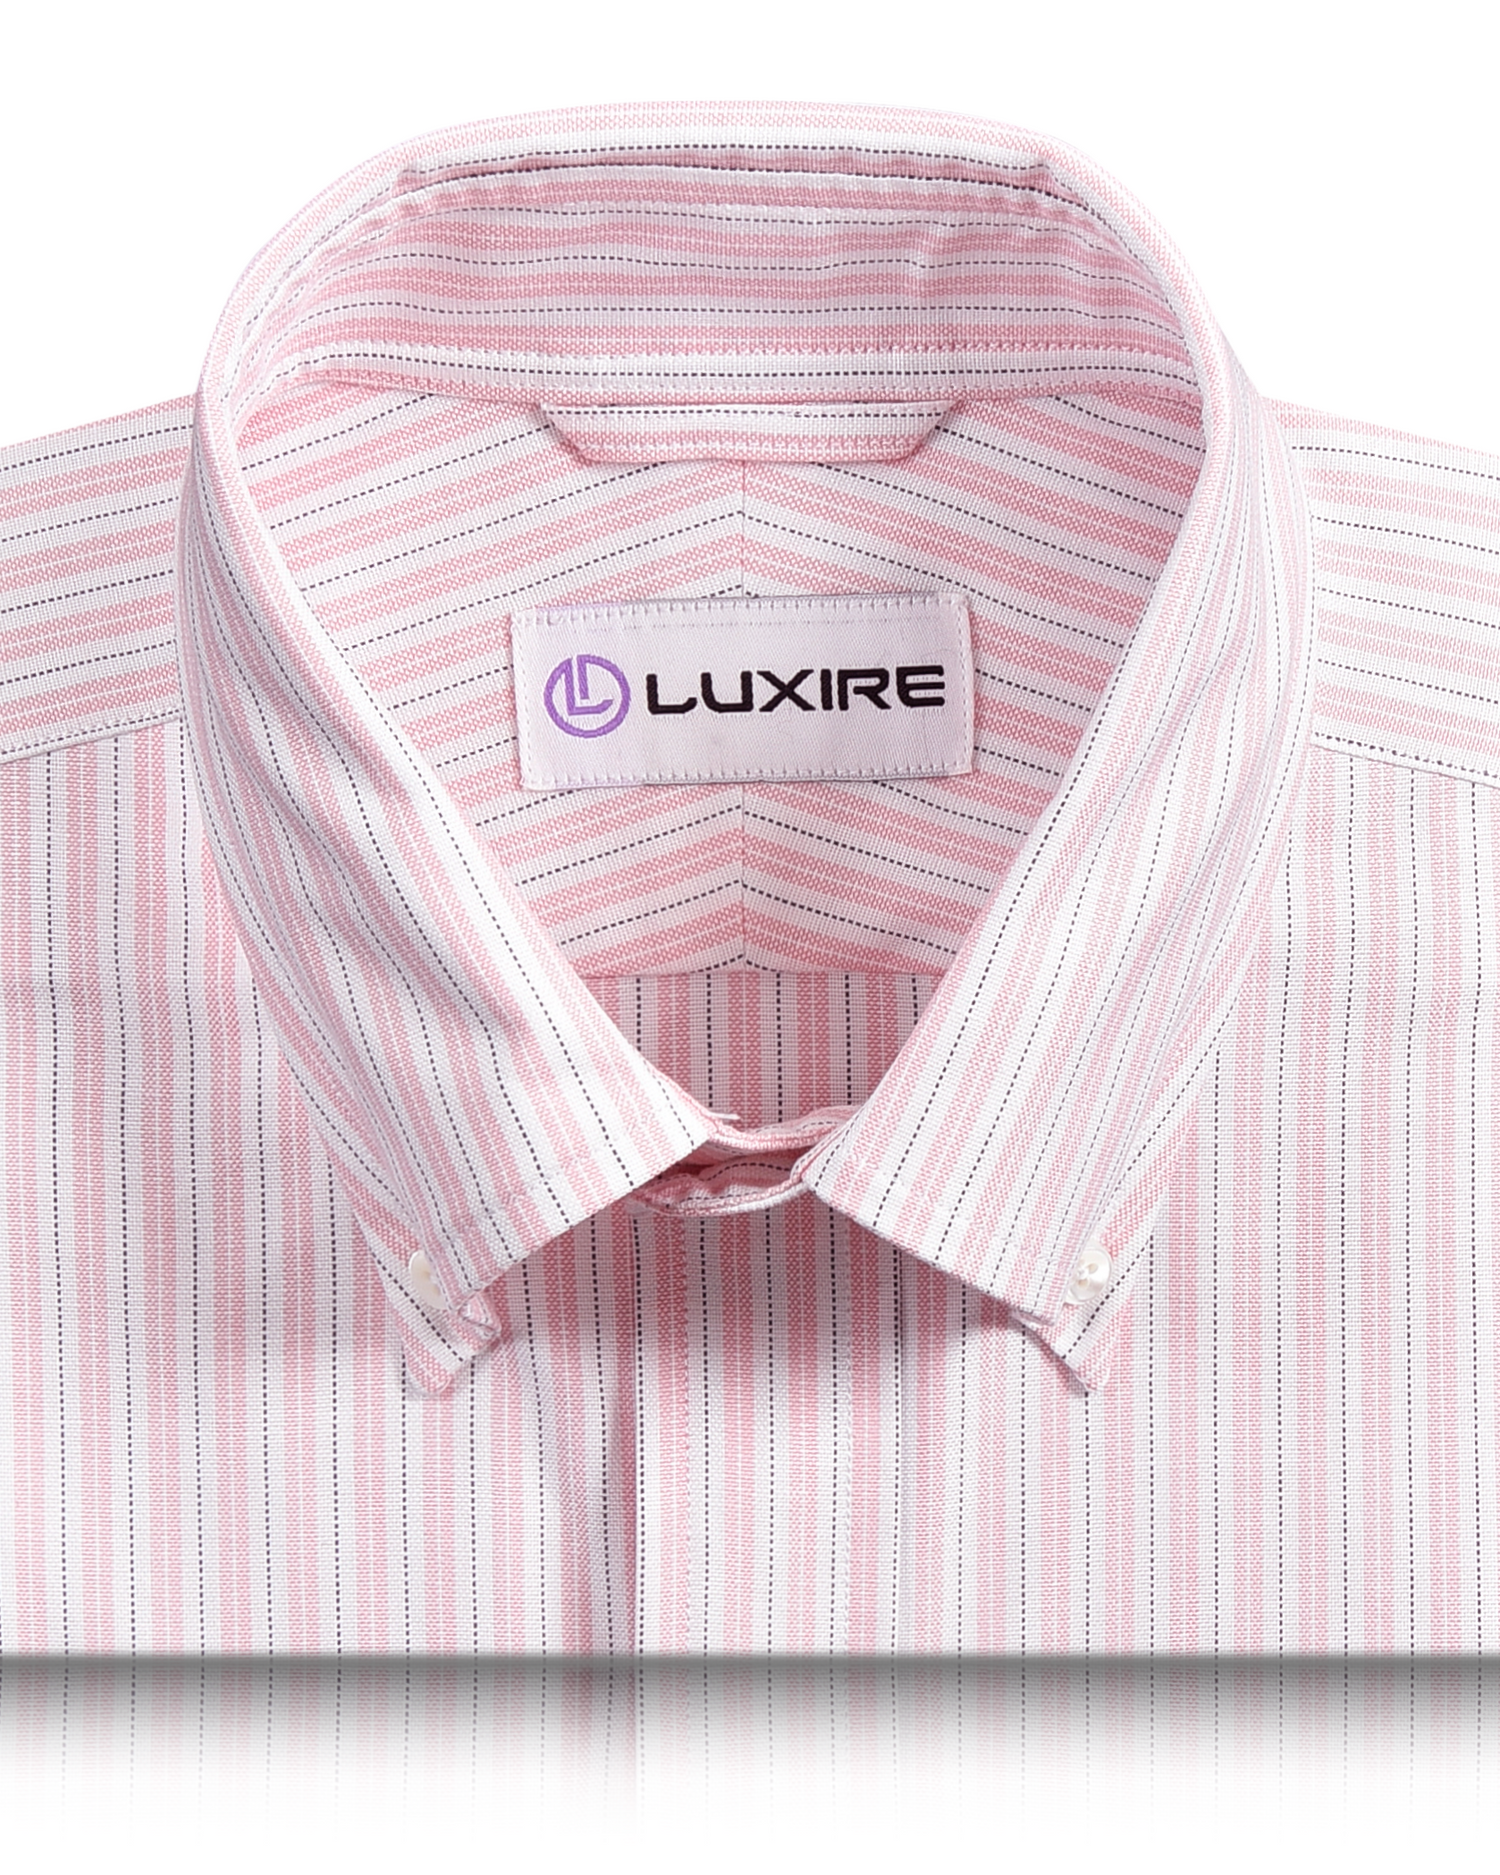 Collar of the custom oxford shirt for men by Luxire in soft pink and navy stripes